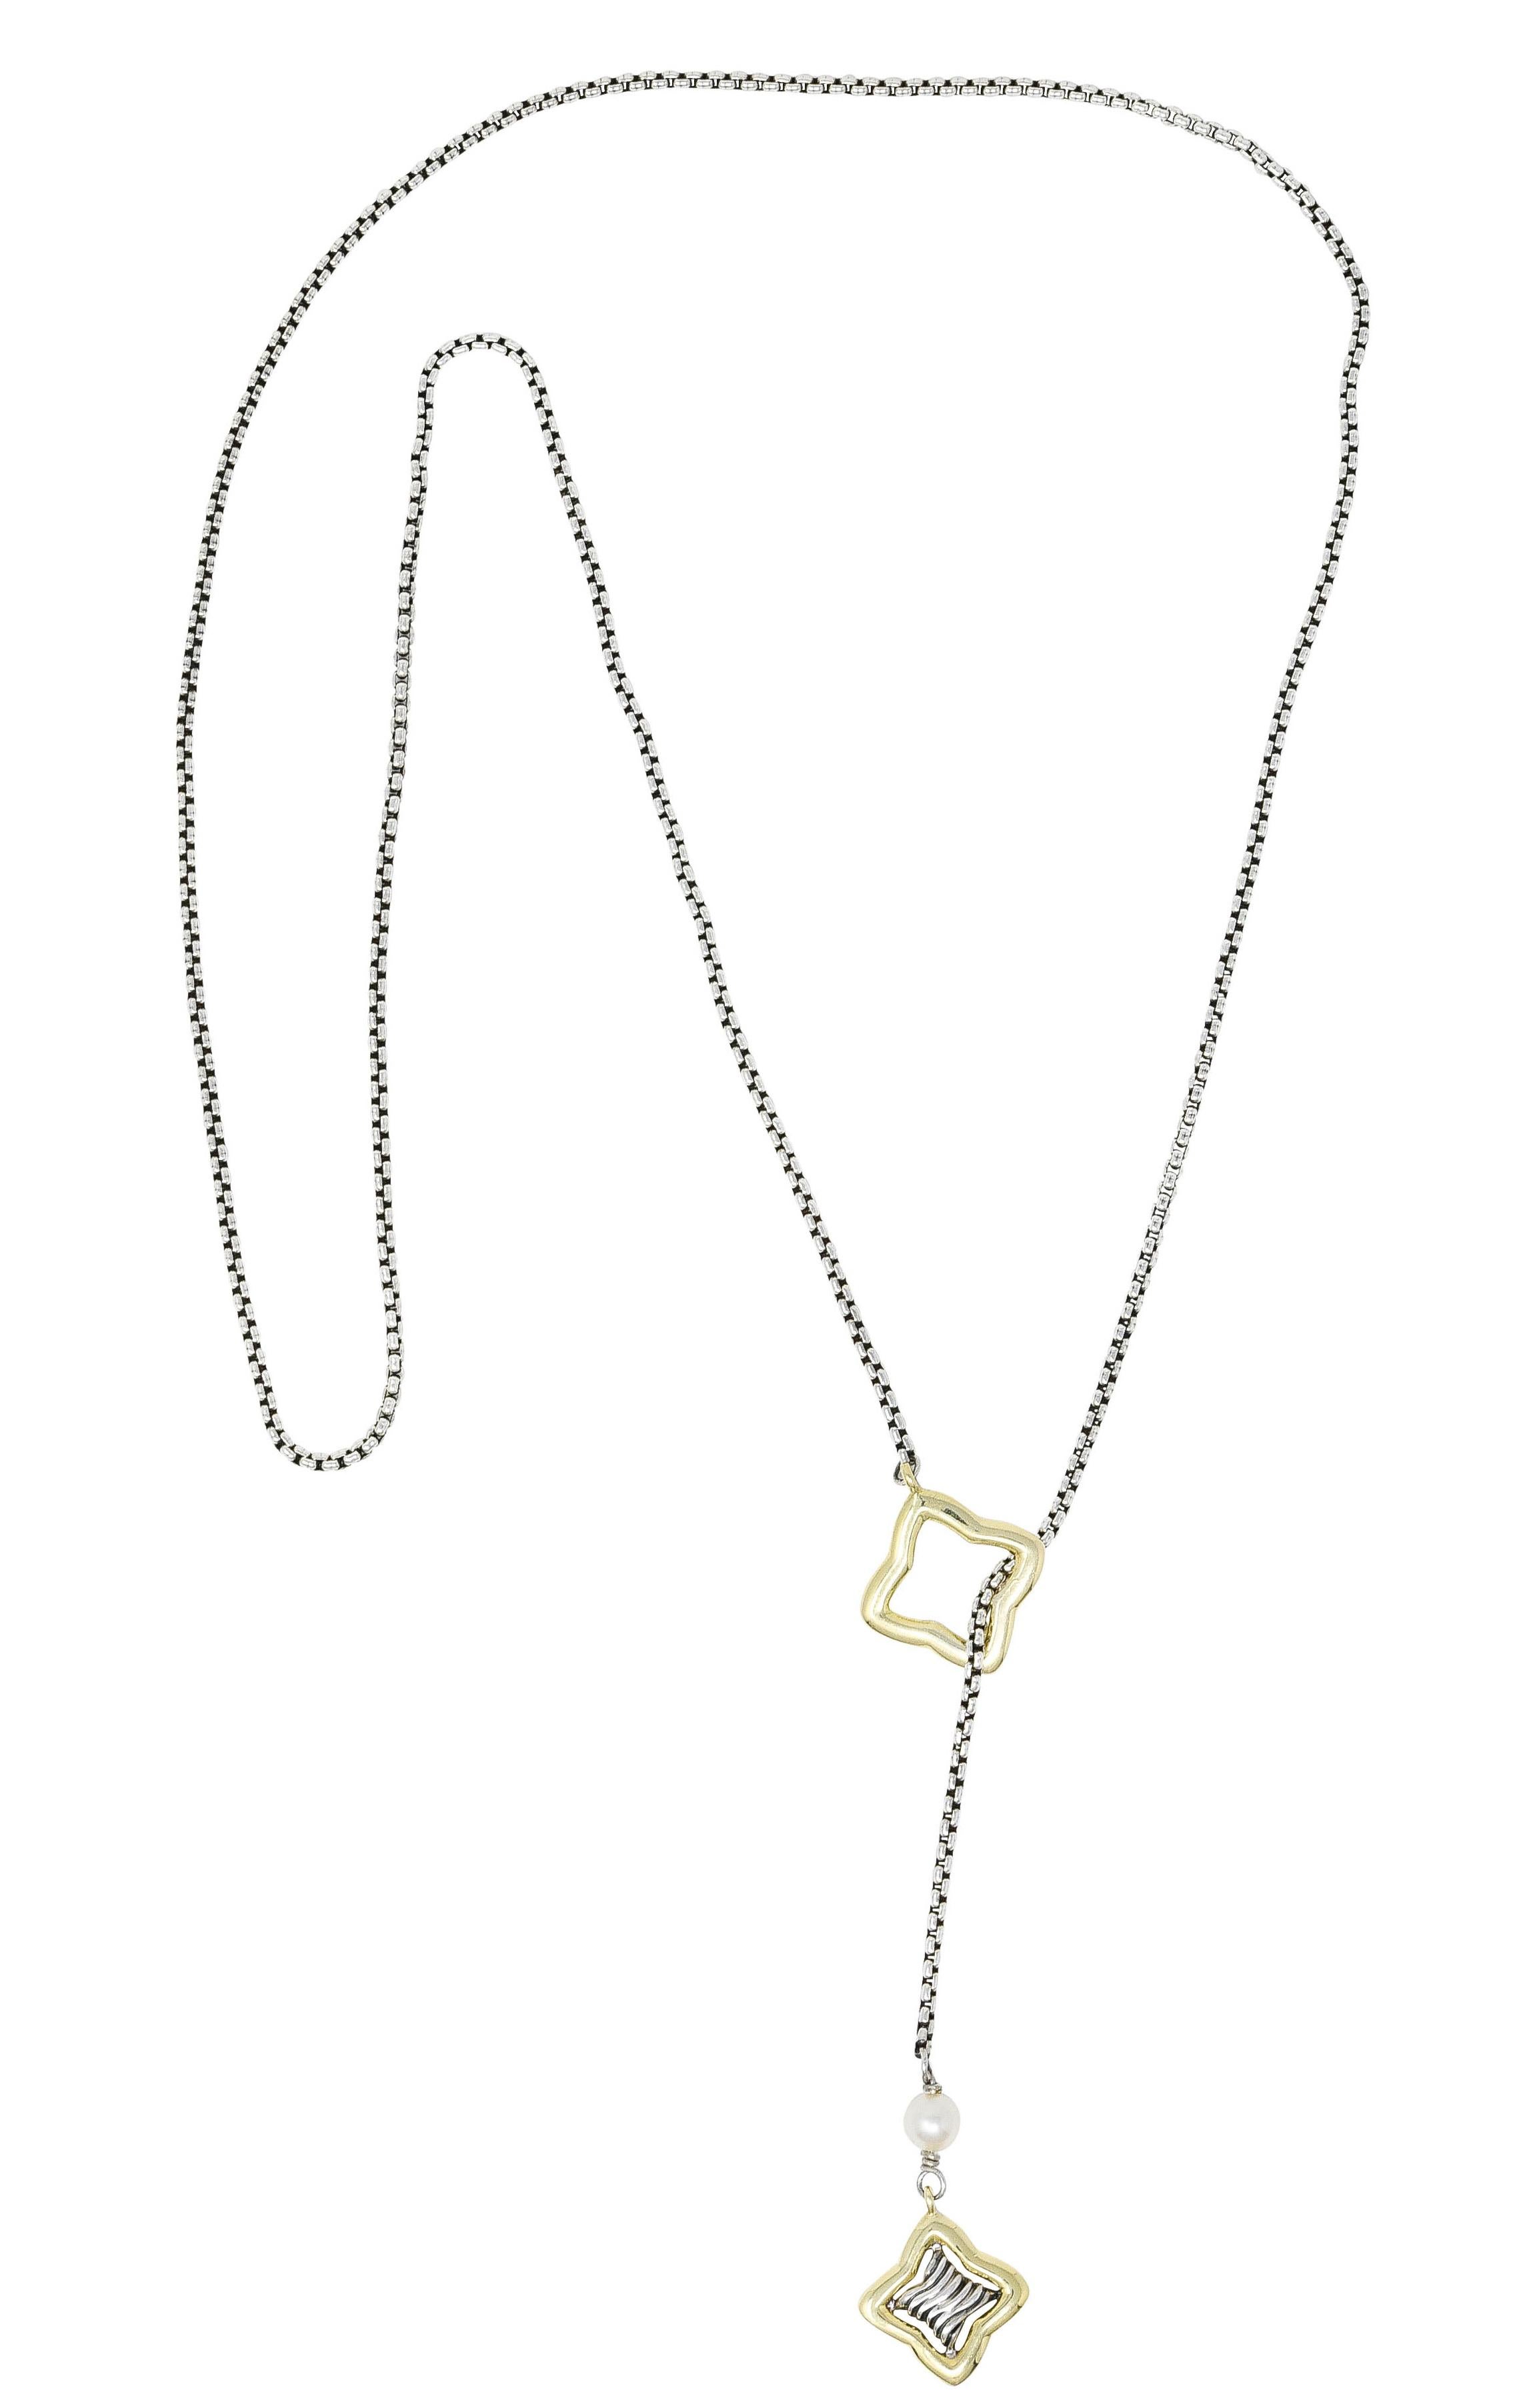 Lariat style necklace designed as 2.0 mm box chain terminating with stylized ends

One end has a gold quatrefoil centering a silver classic cable motif suspended from a 3.0 mm pearl bead

Pearl is white in body color with moderate rosè overtones and